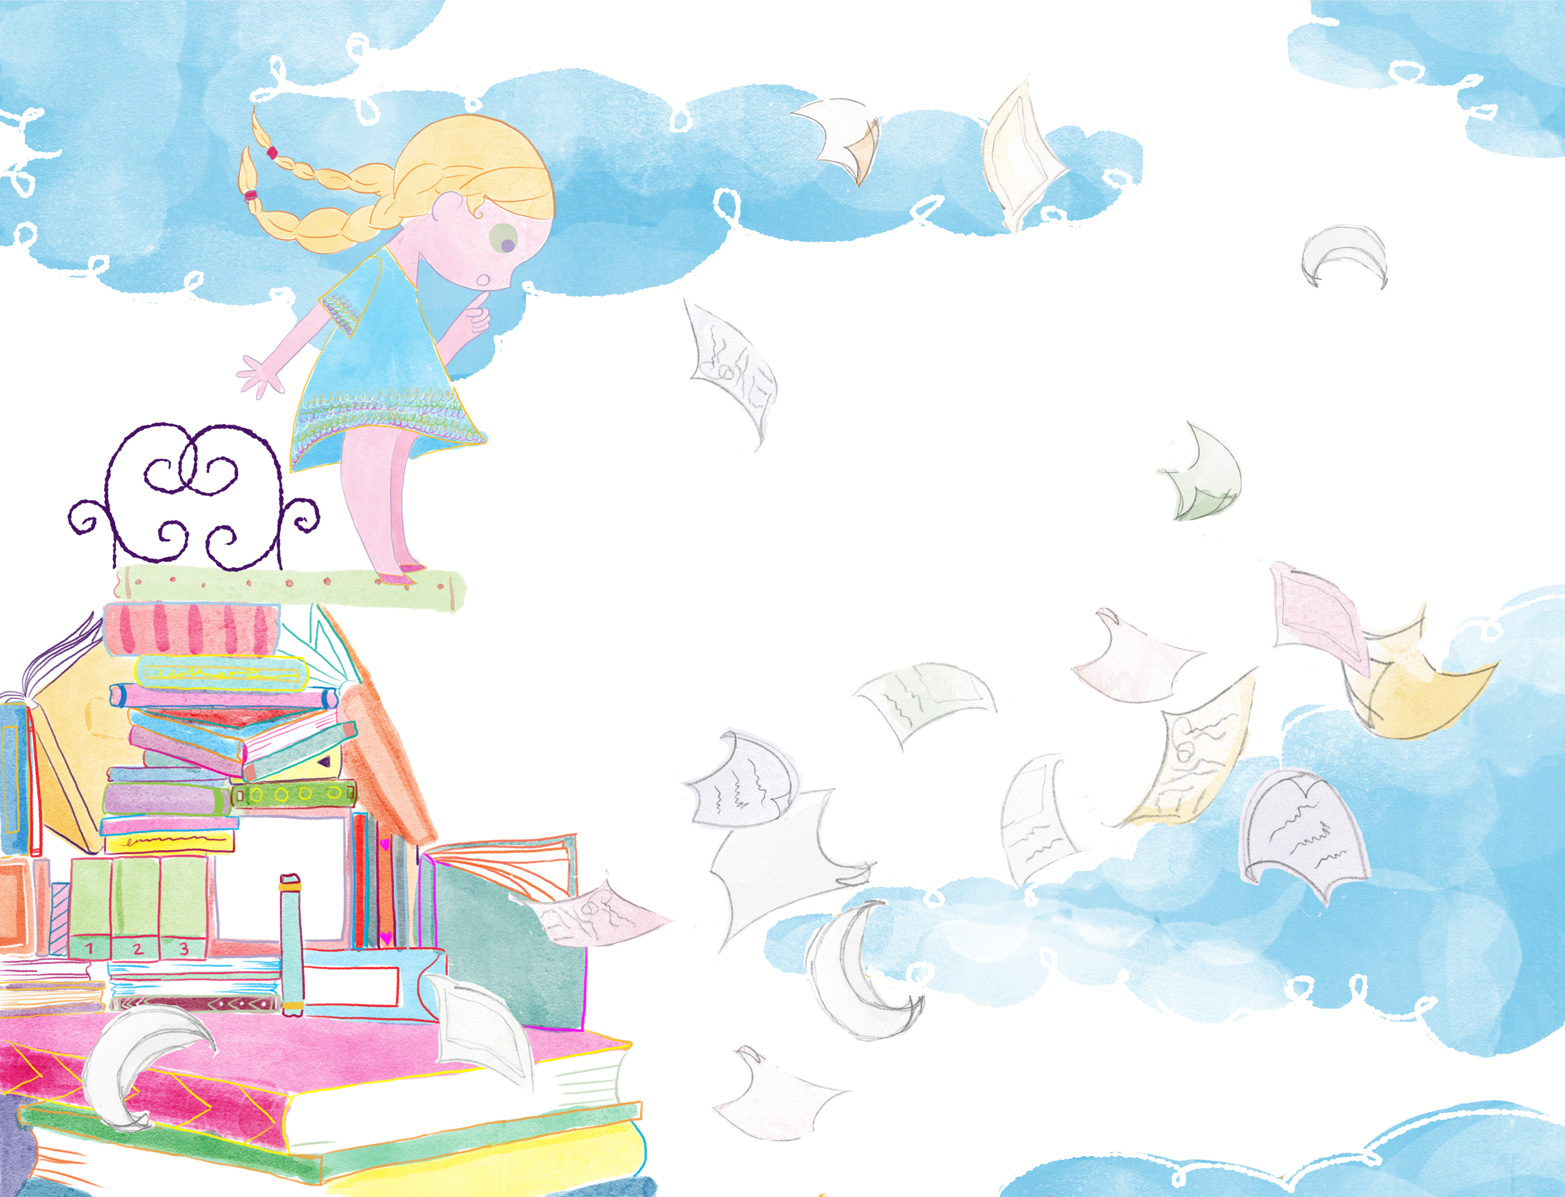 books, illustration, fall, pages, girl, adventure, color, child, children, literature, picturebook, picture, clouds, colorful